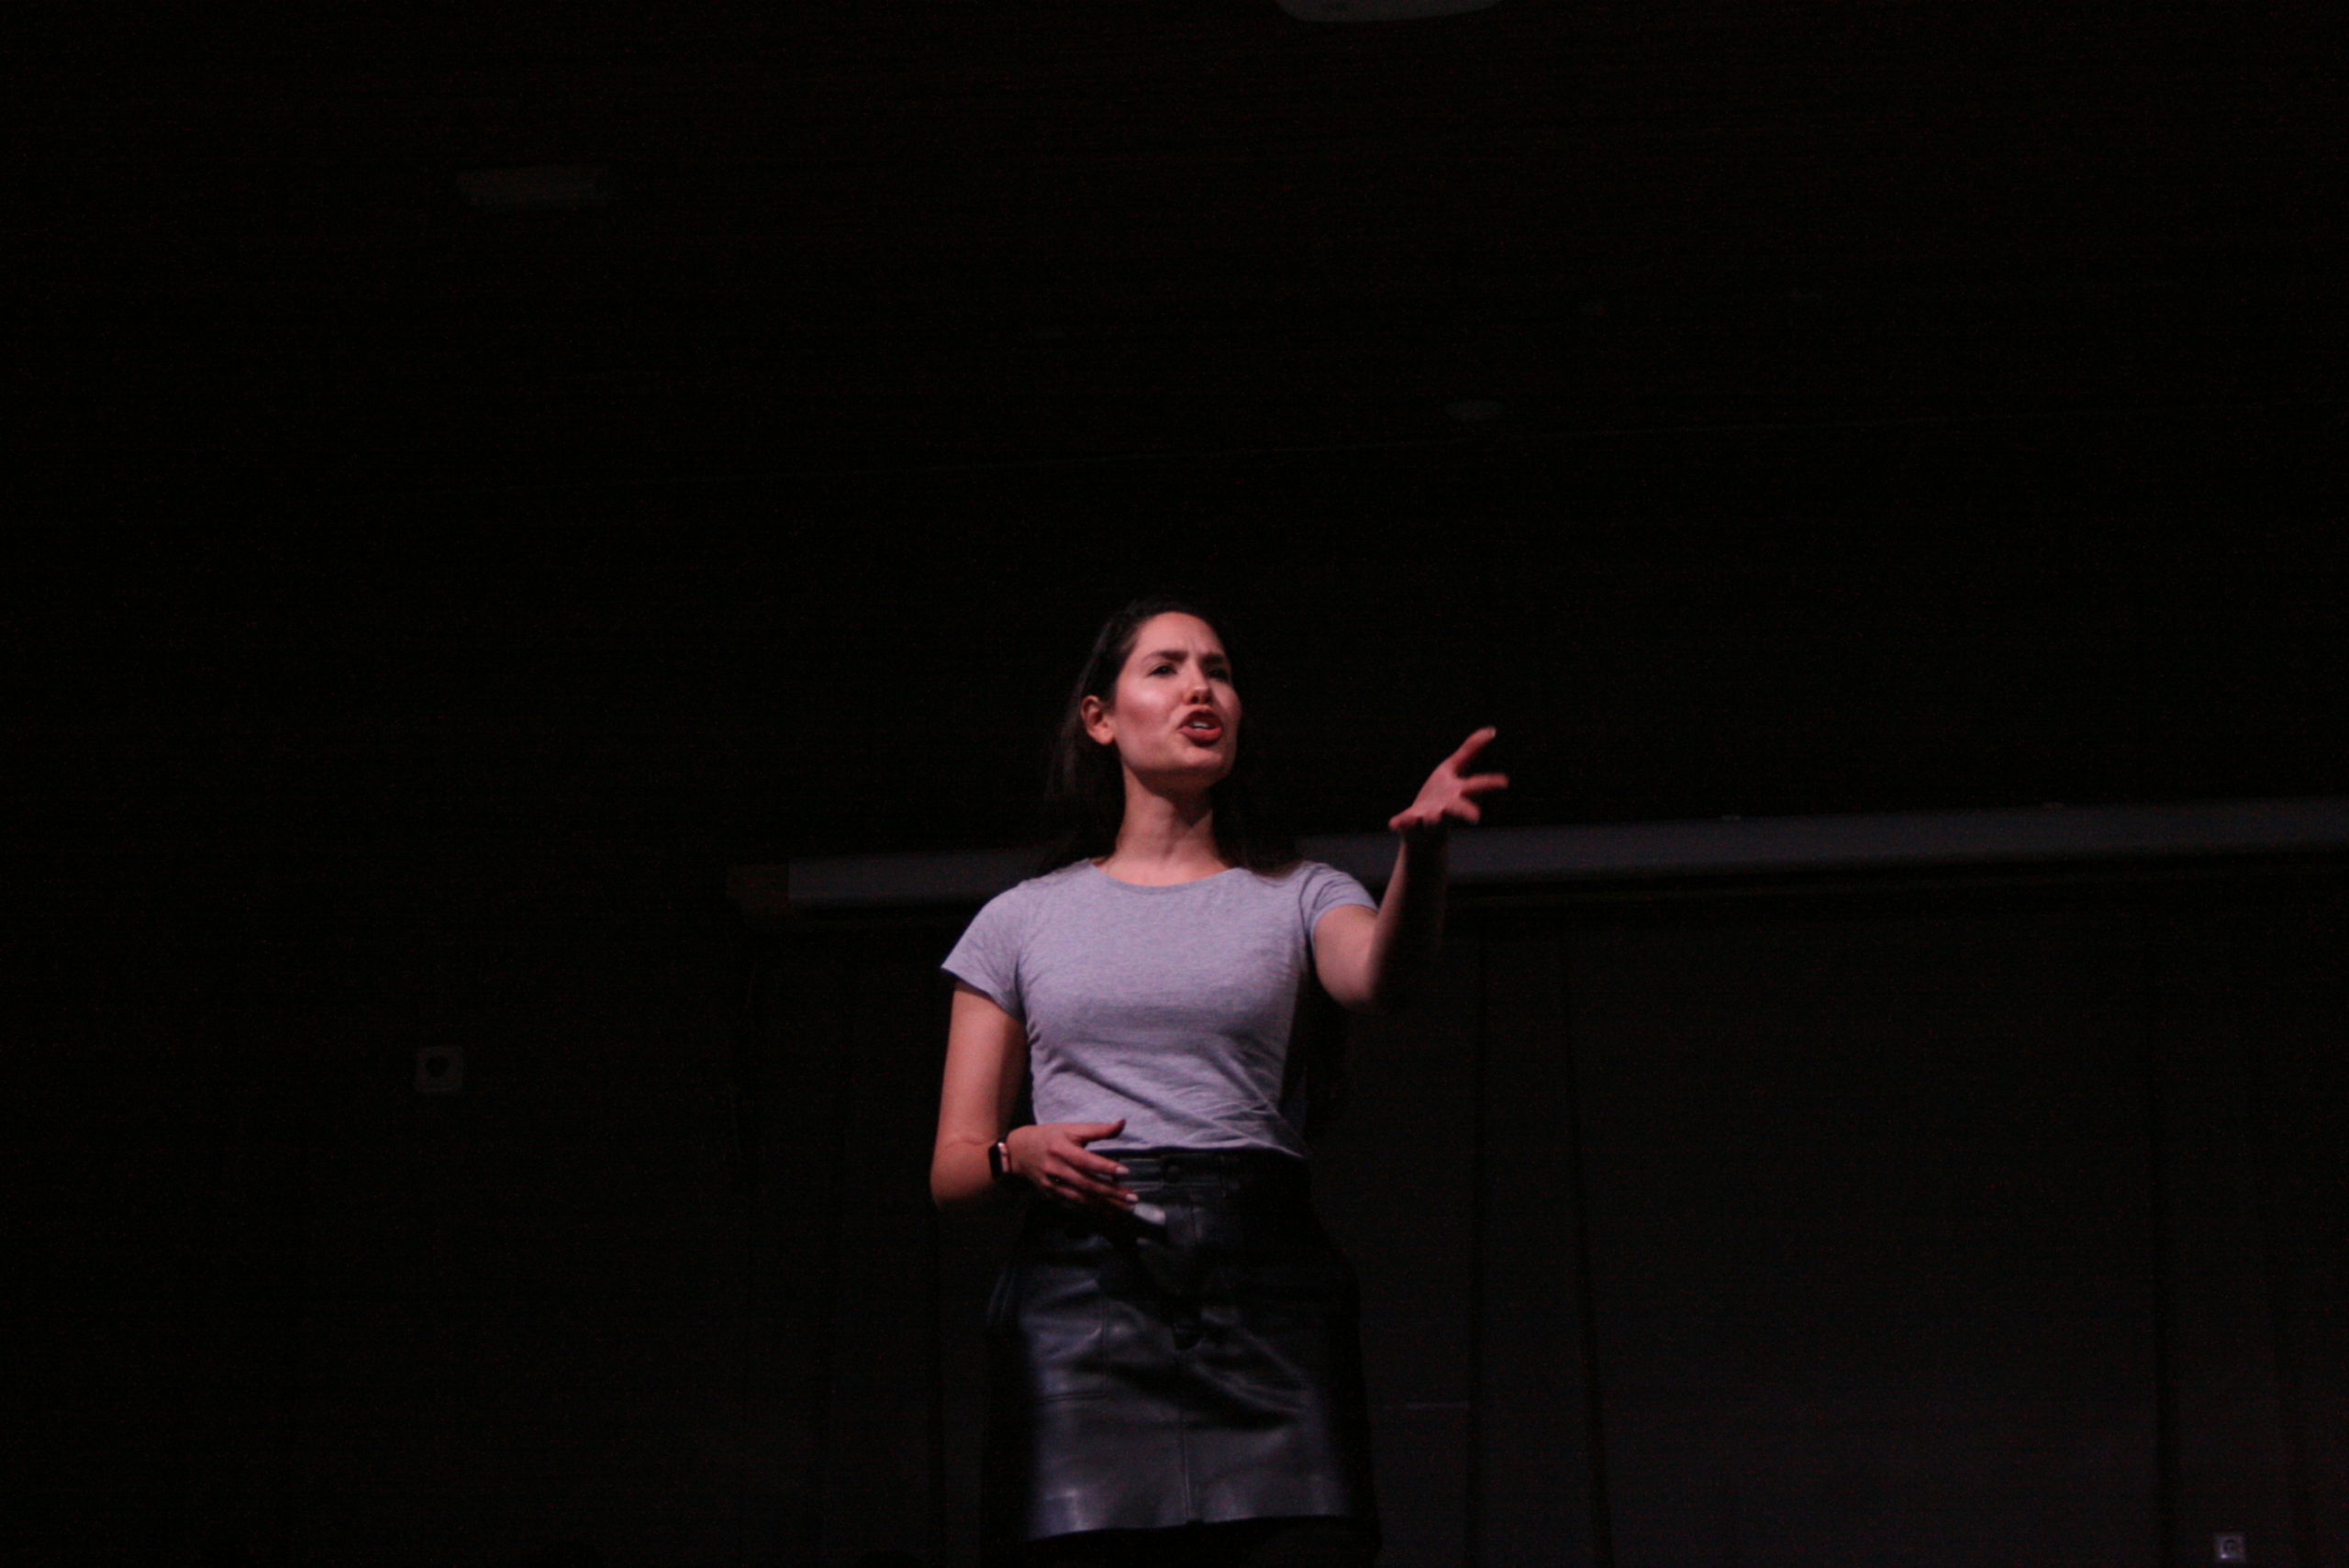 Photo from the show "The Chairs". A female actor addresses the audience. She looks angry, reaching out one of her arms.